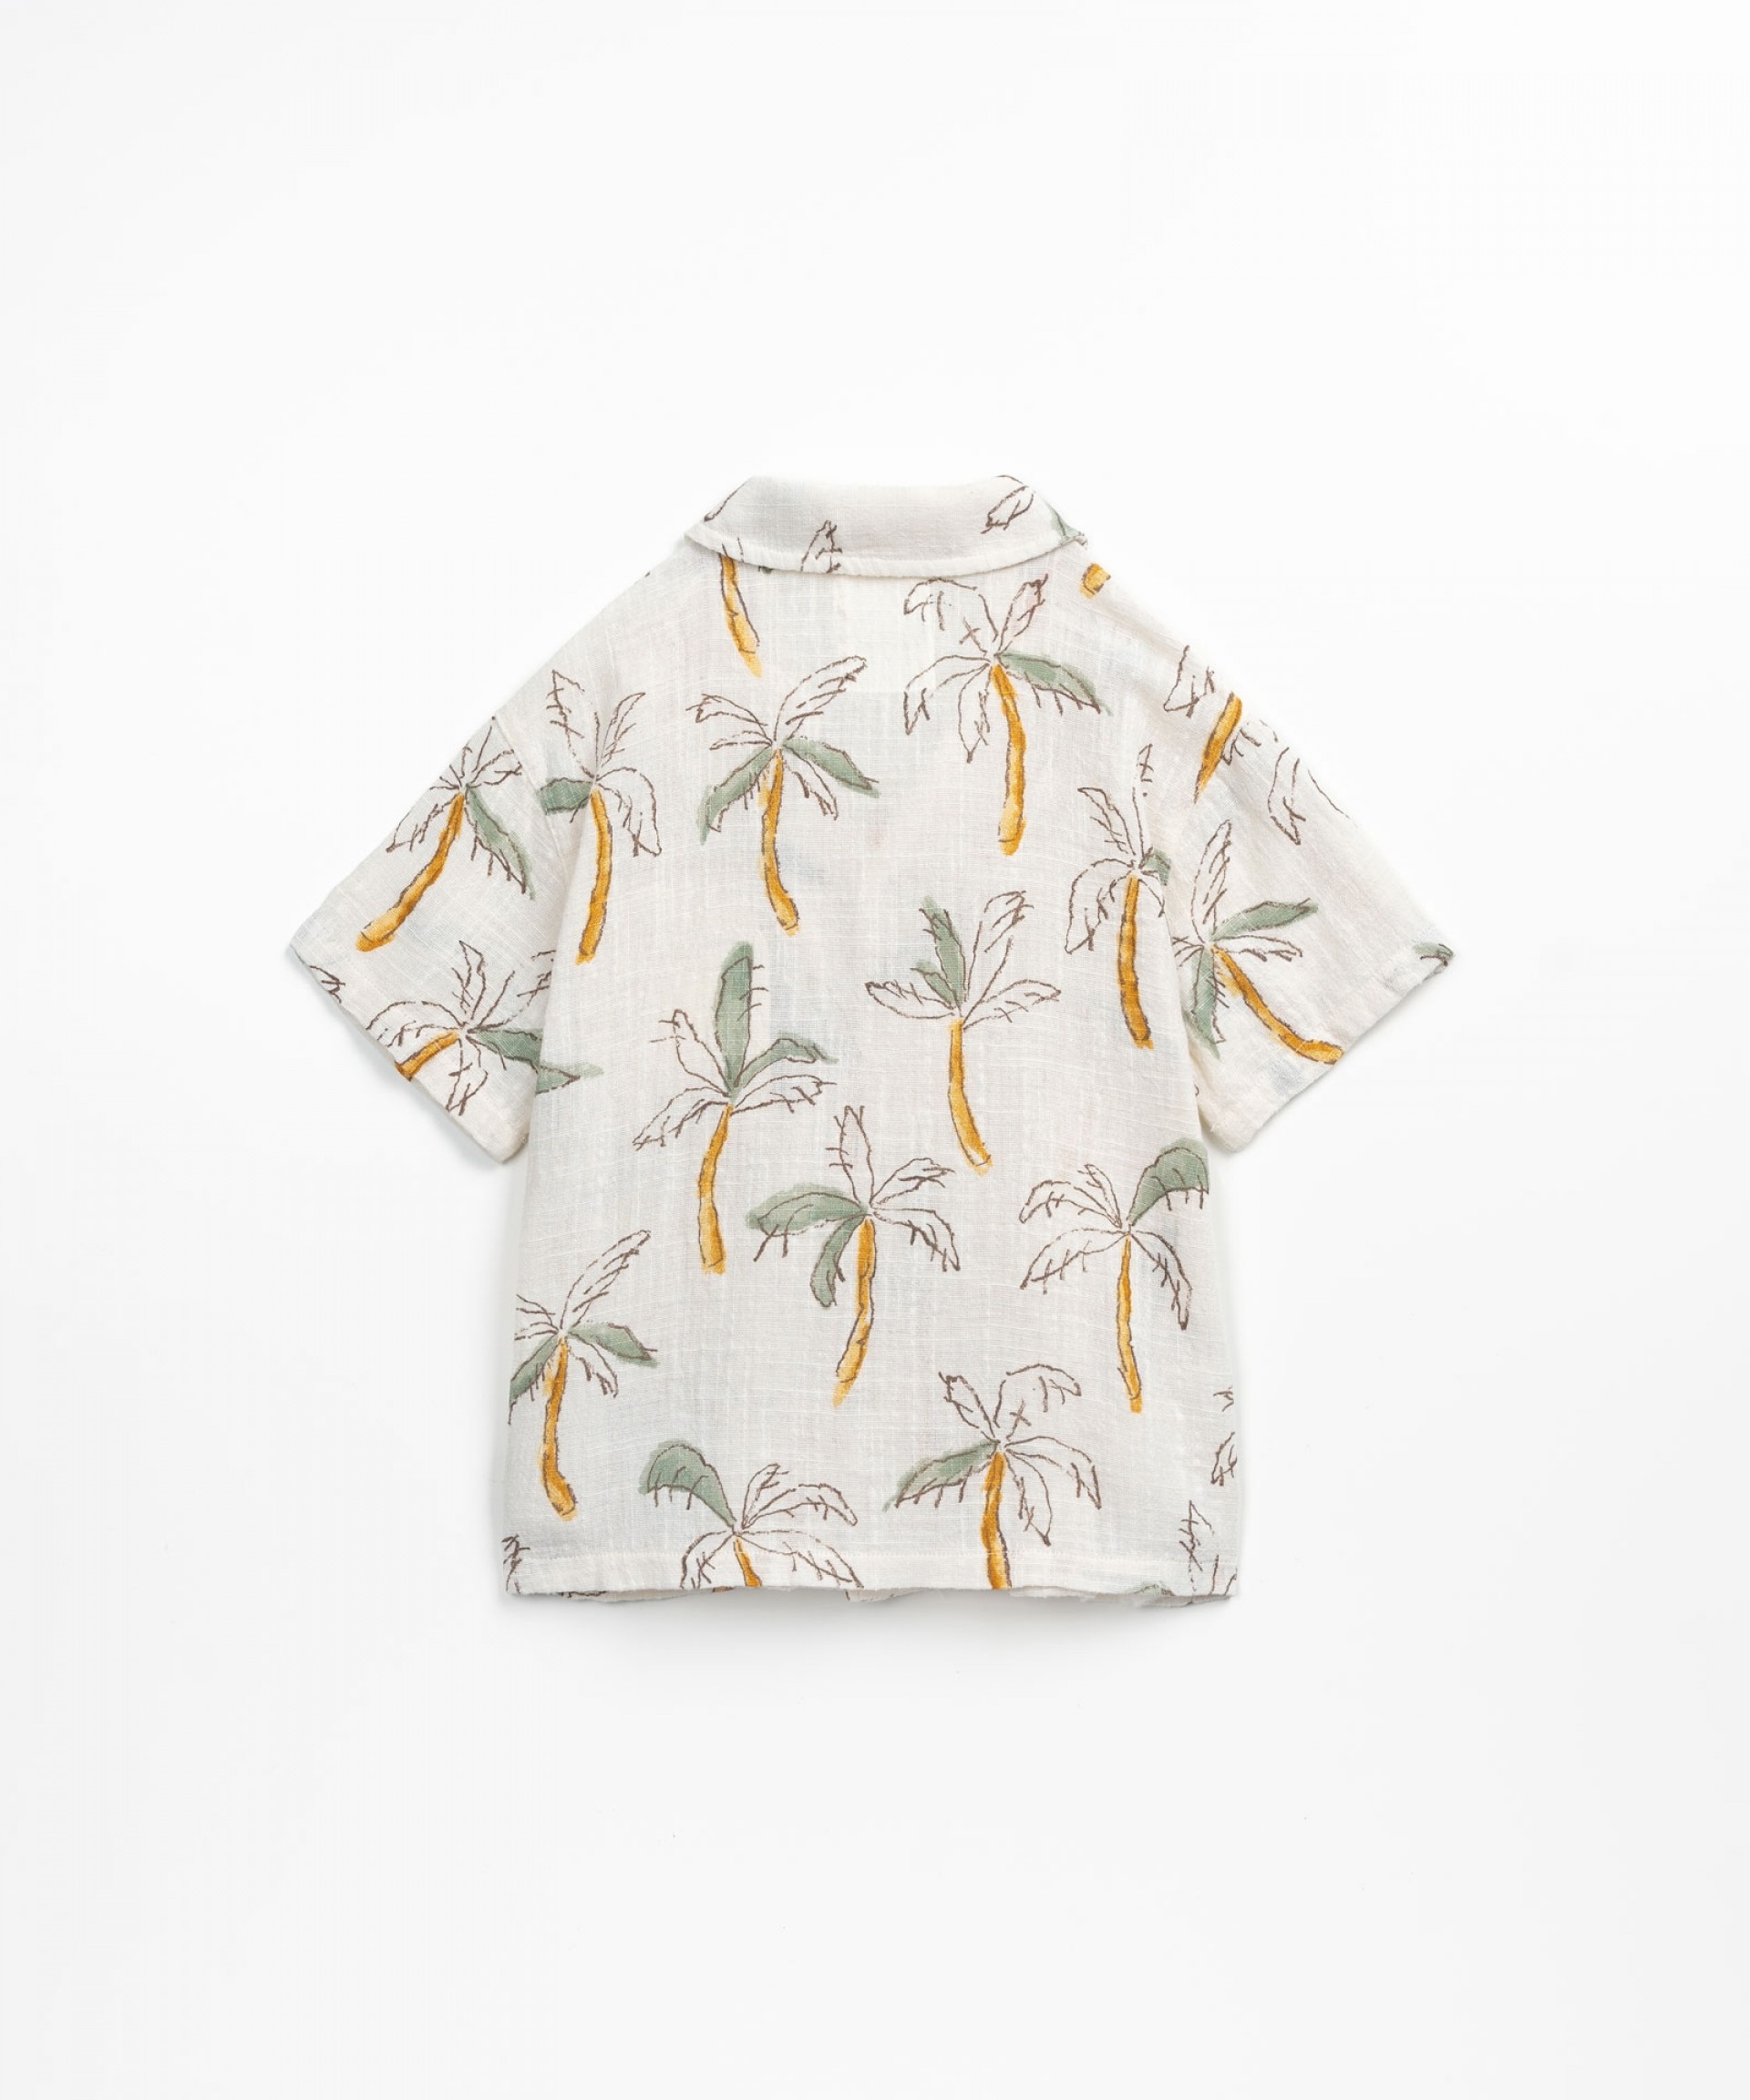 Shirt with palm trees print | Textile Art